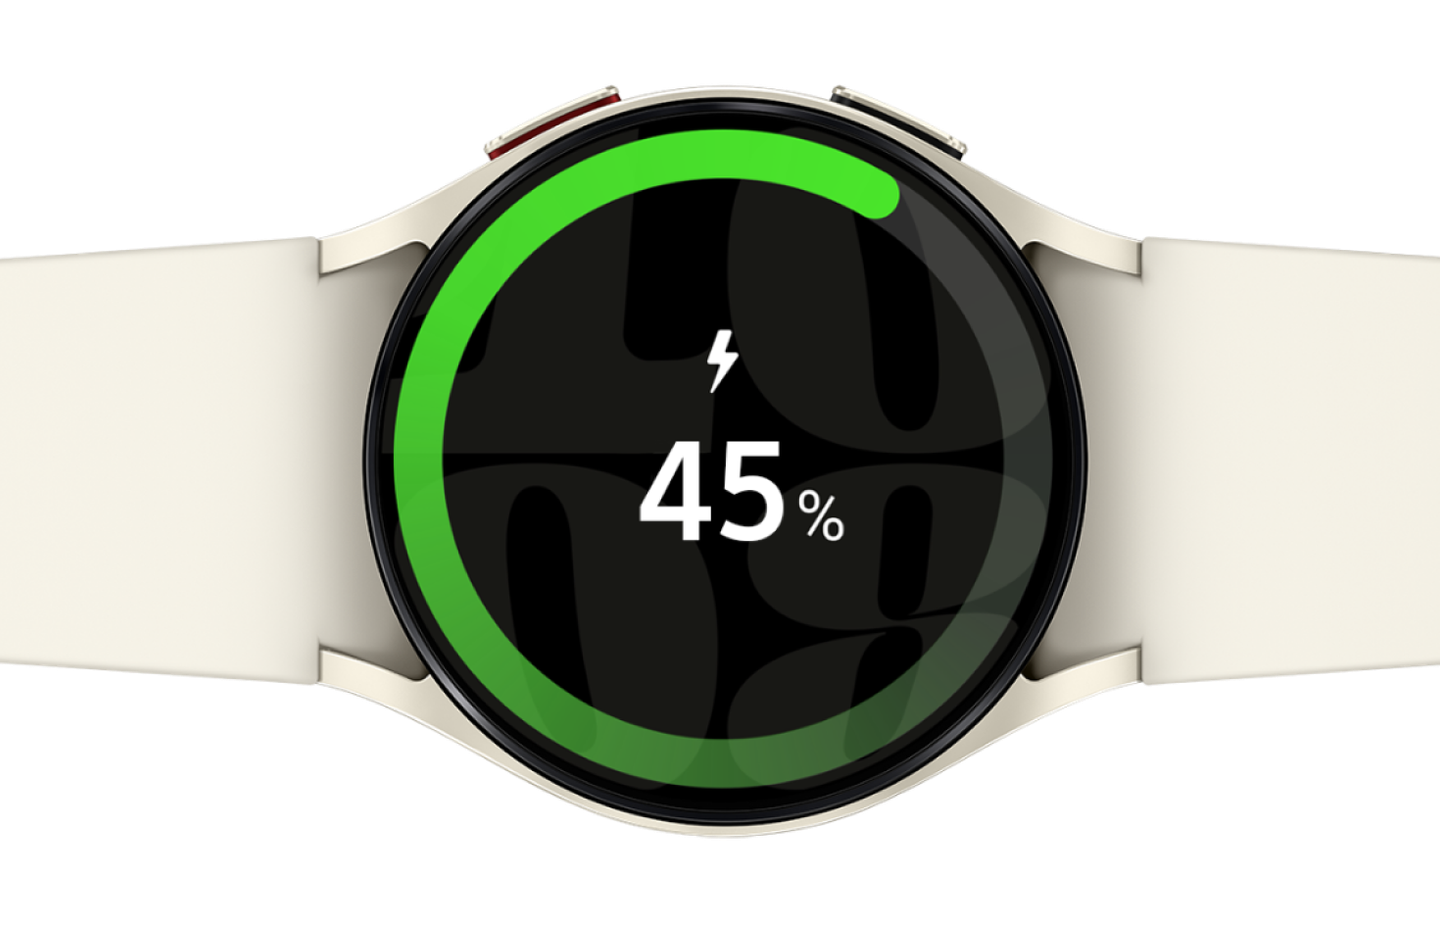 A Watch6 displaying 45% charge status on its display